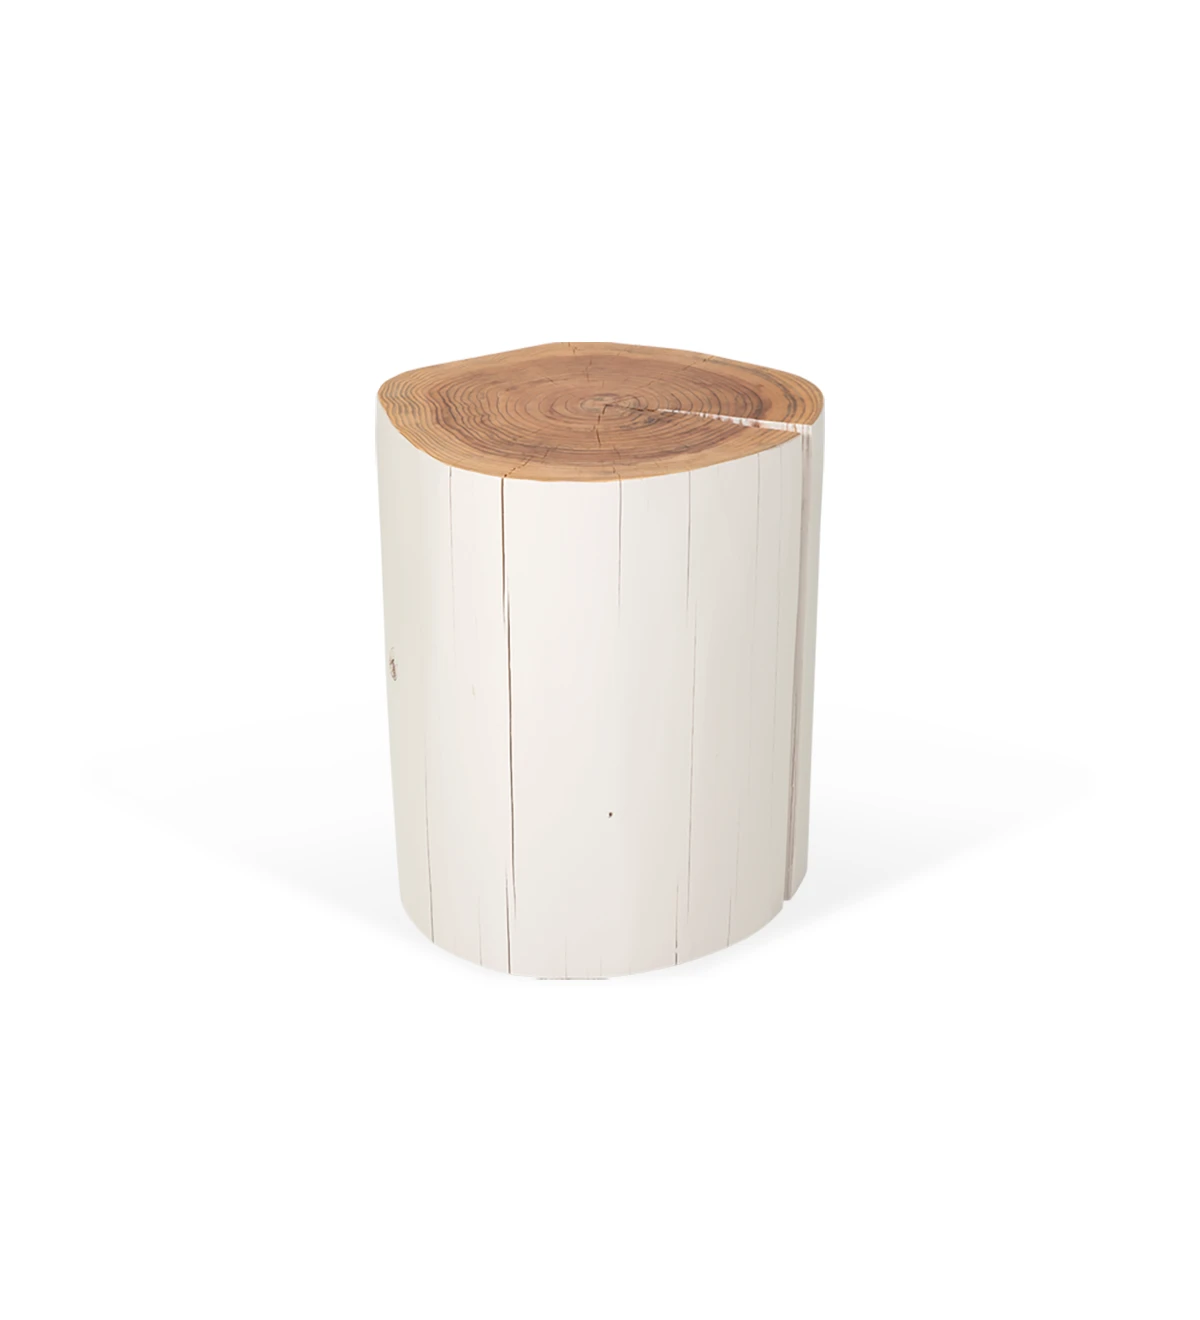 Tall trunk center table in natural pearl lacquered cryptomeria wood